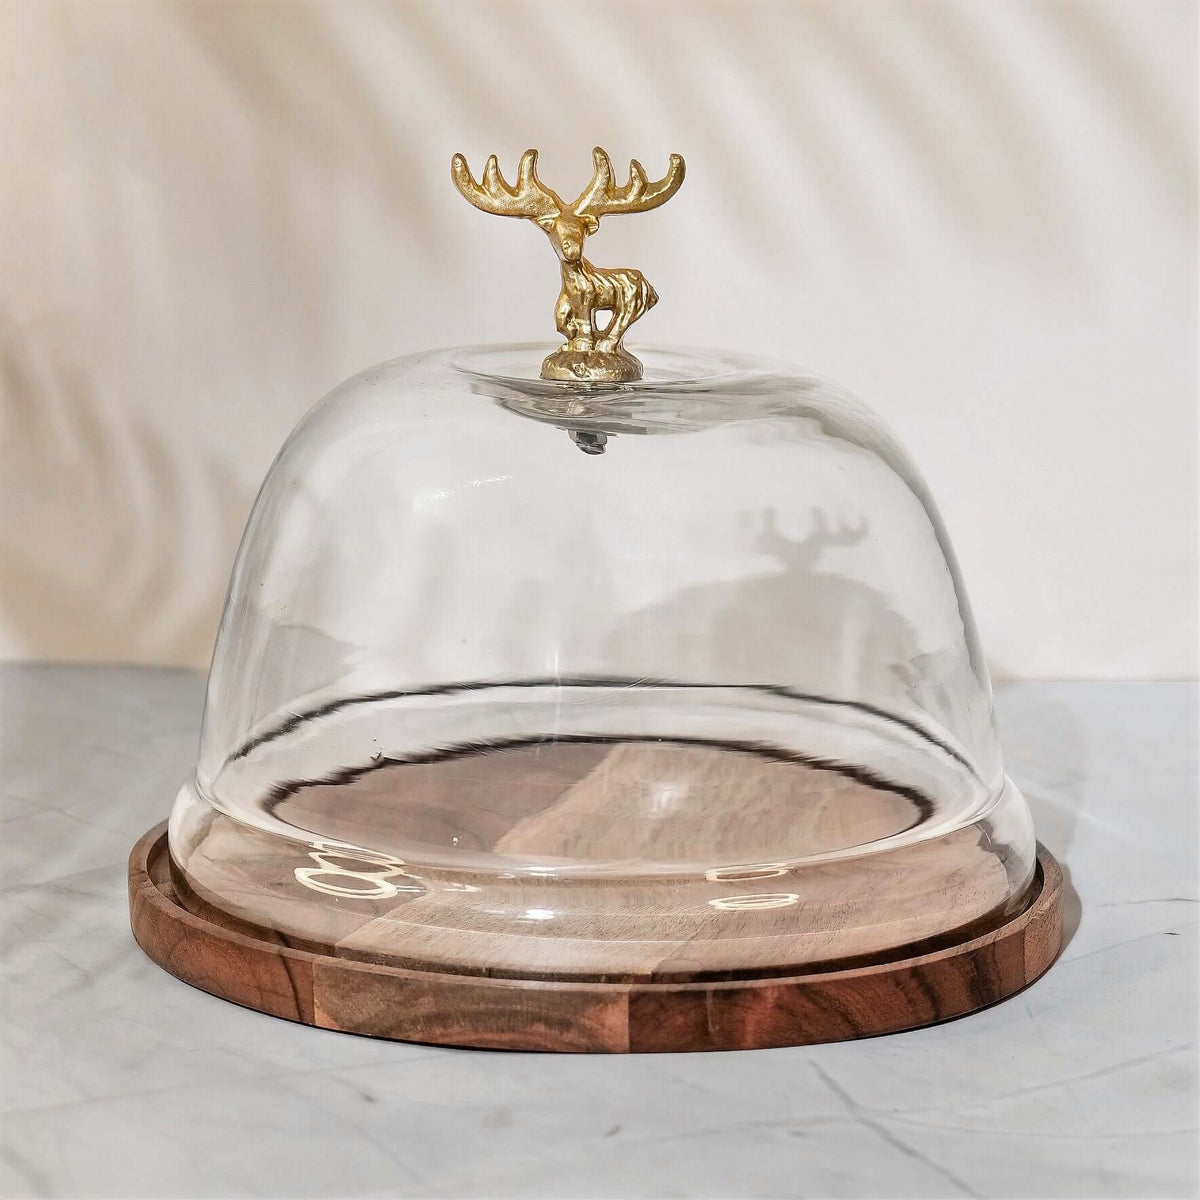 Wooden Cake Stand with Glass Dome - 8" Reindeer